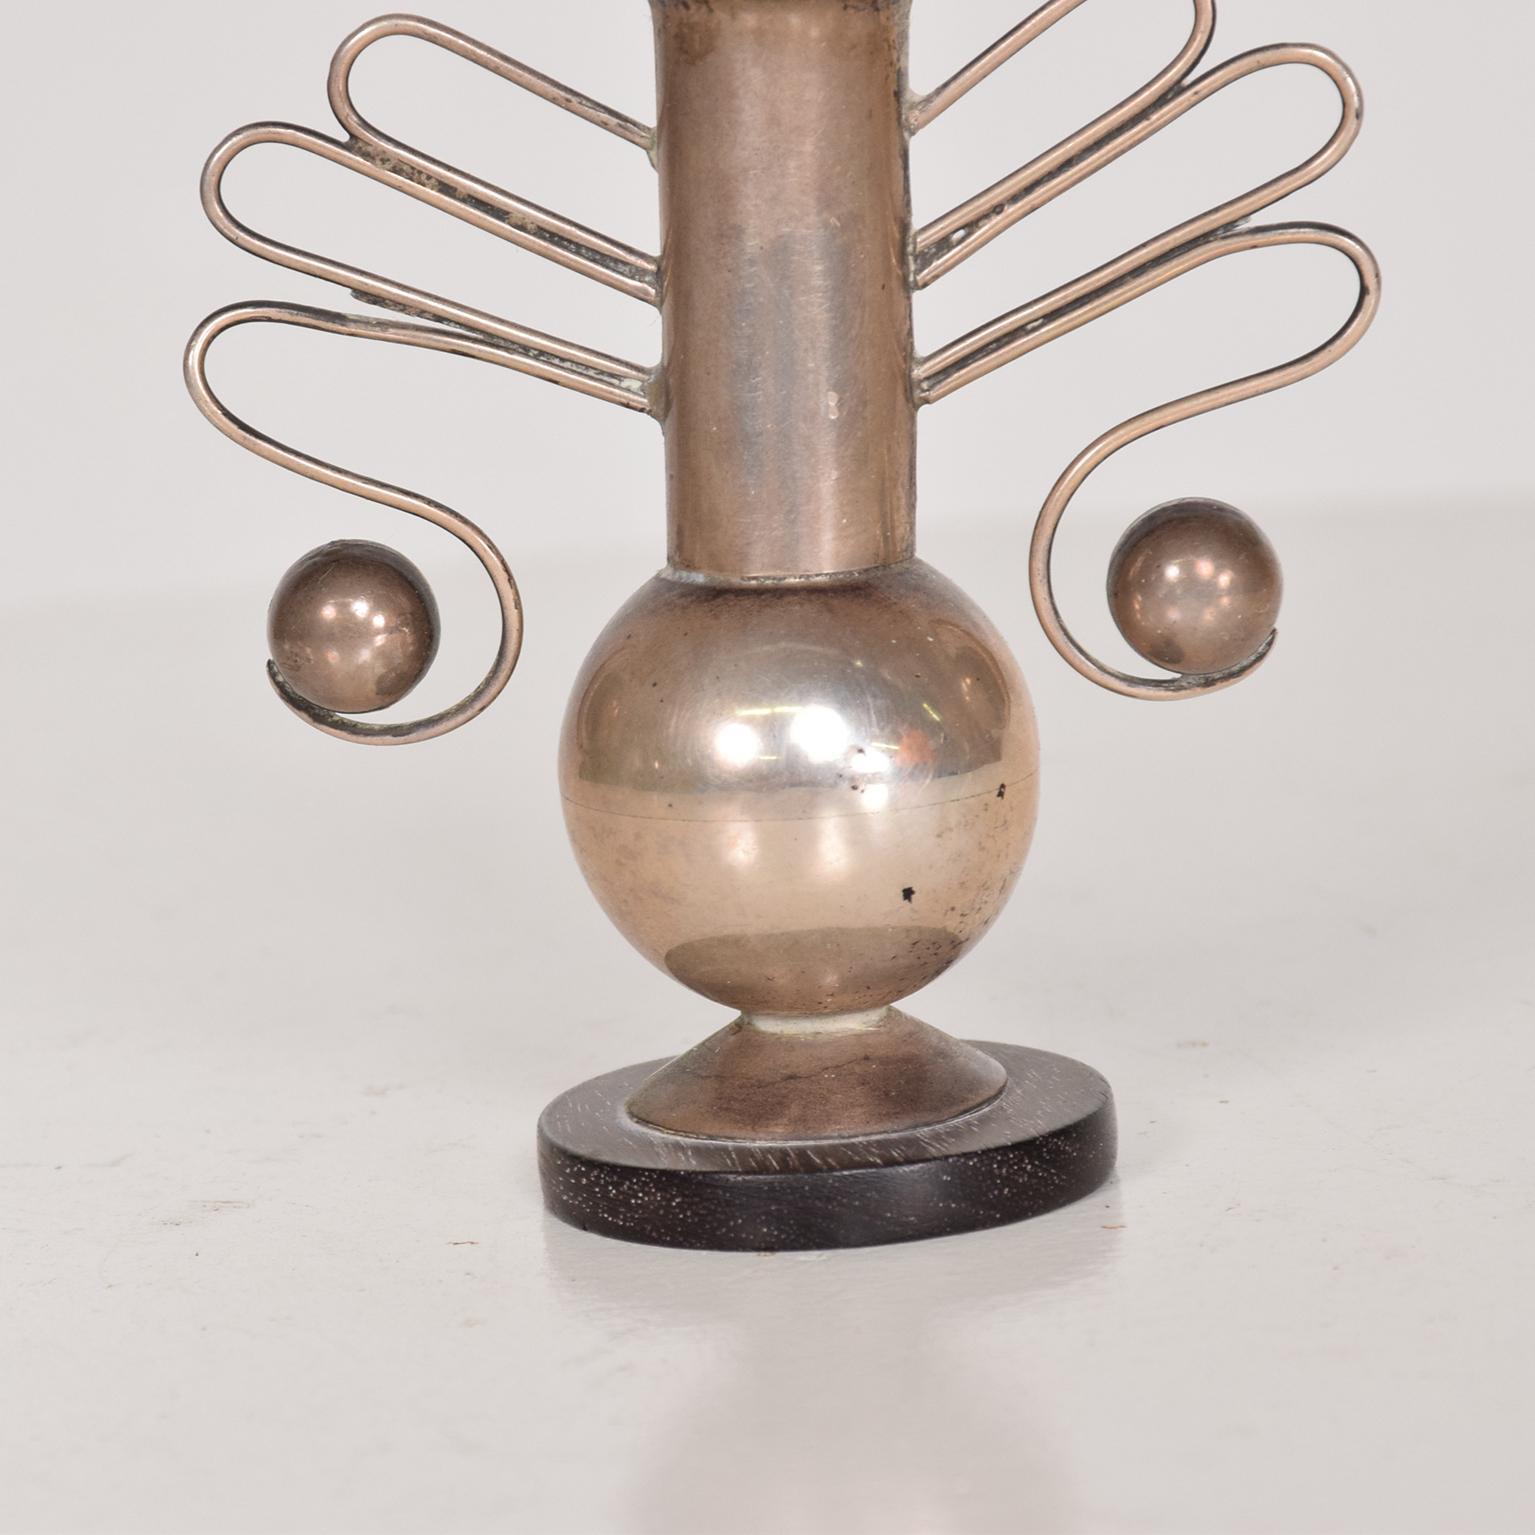 Patinated Mexican Modernist Decorative Vase by William Spratling, Silver and Rosewood